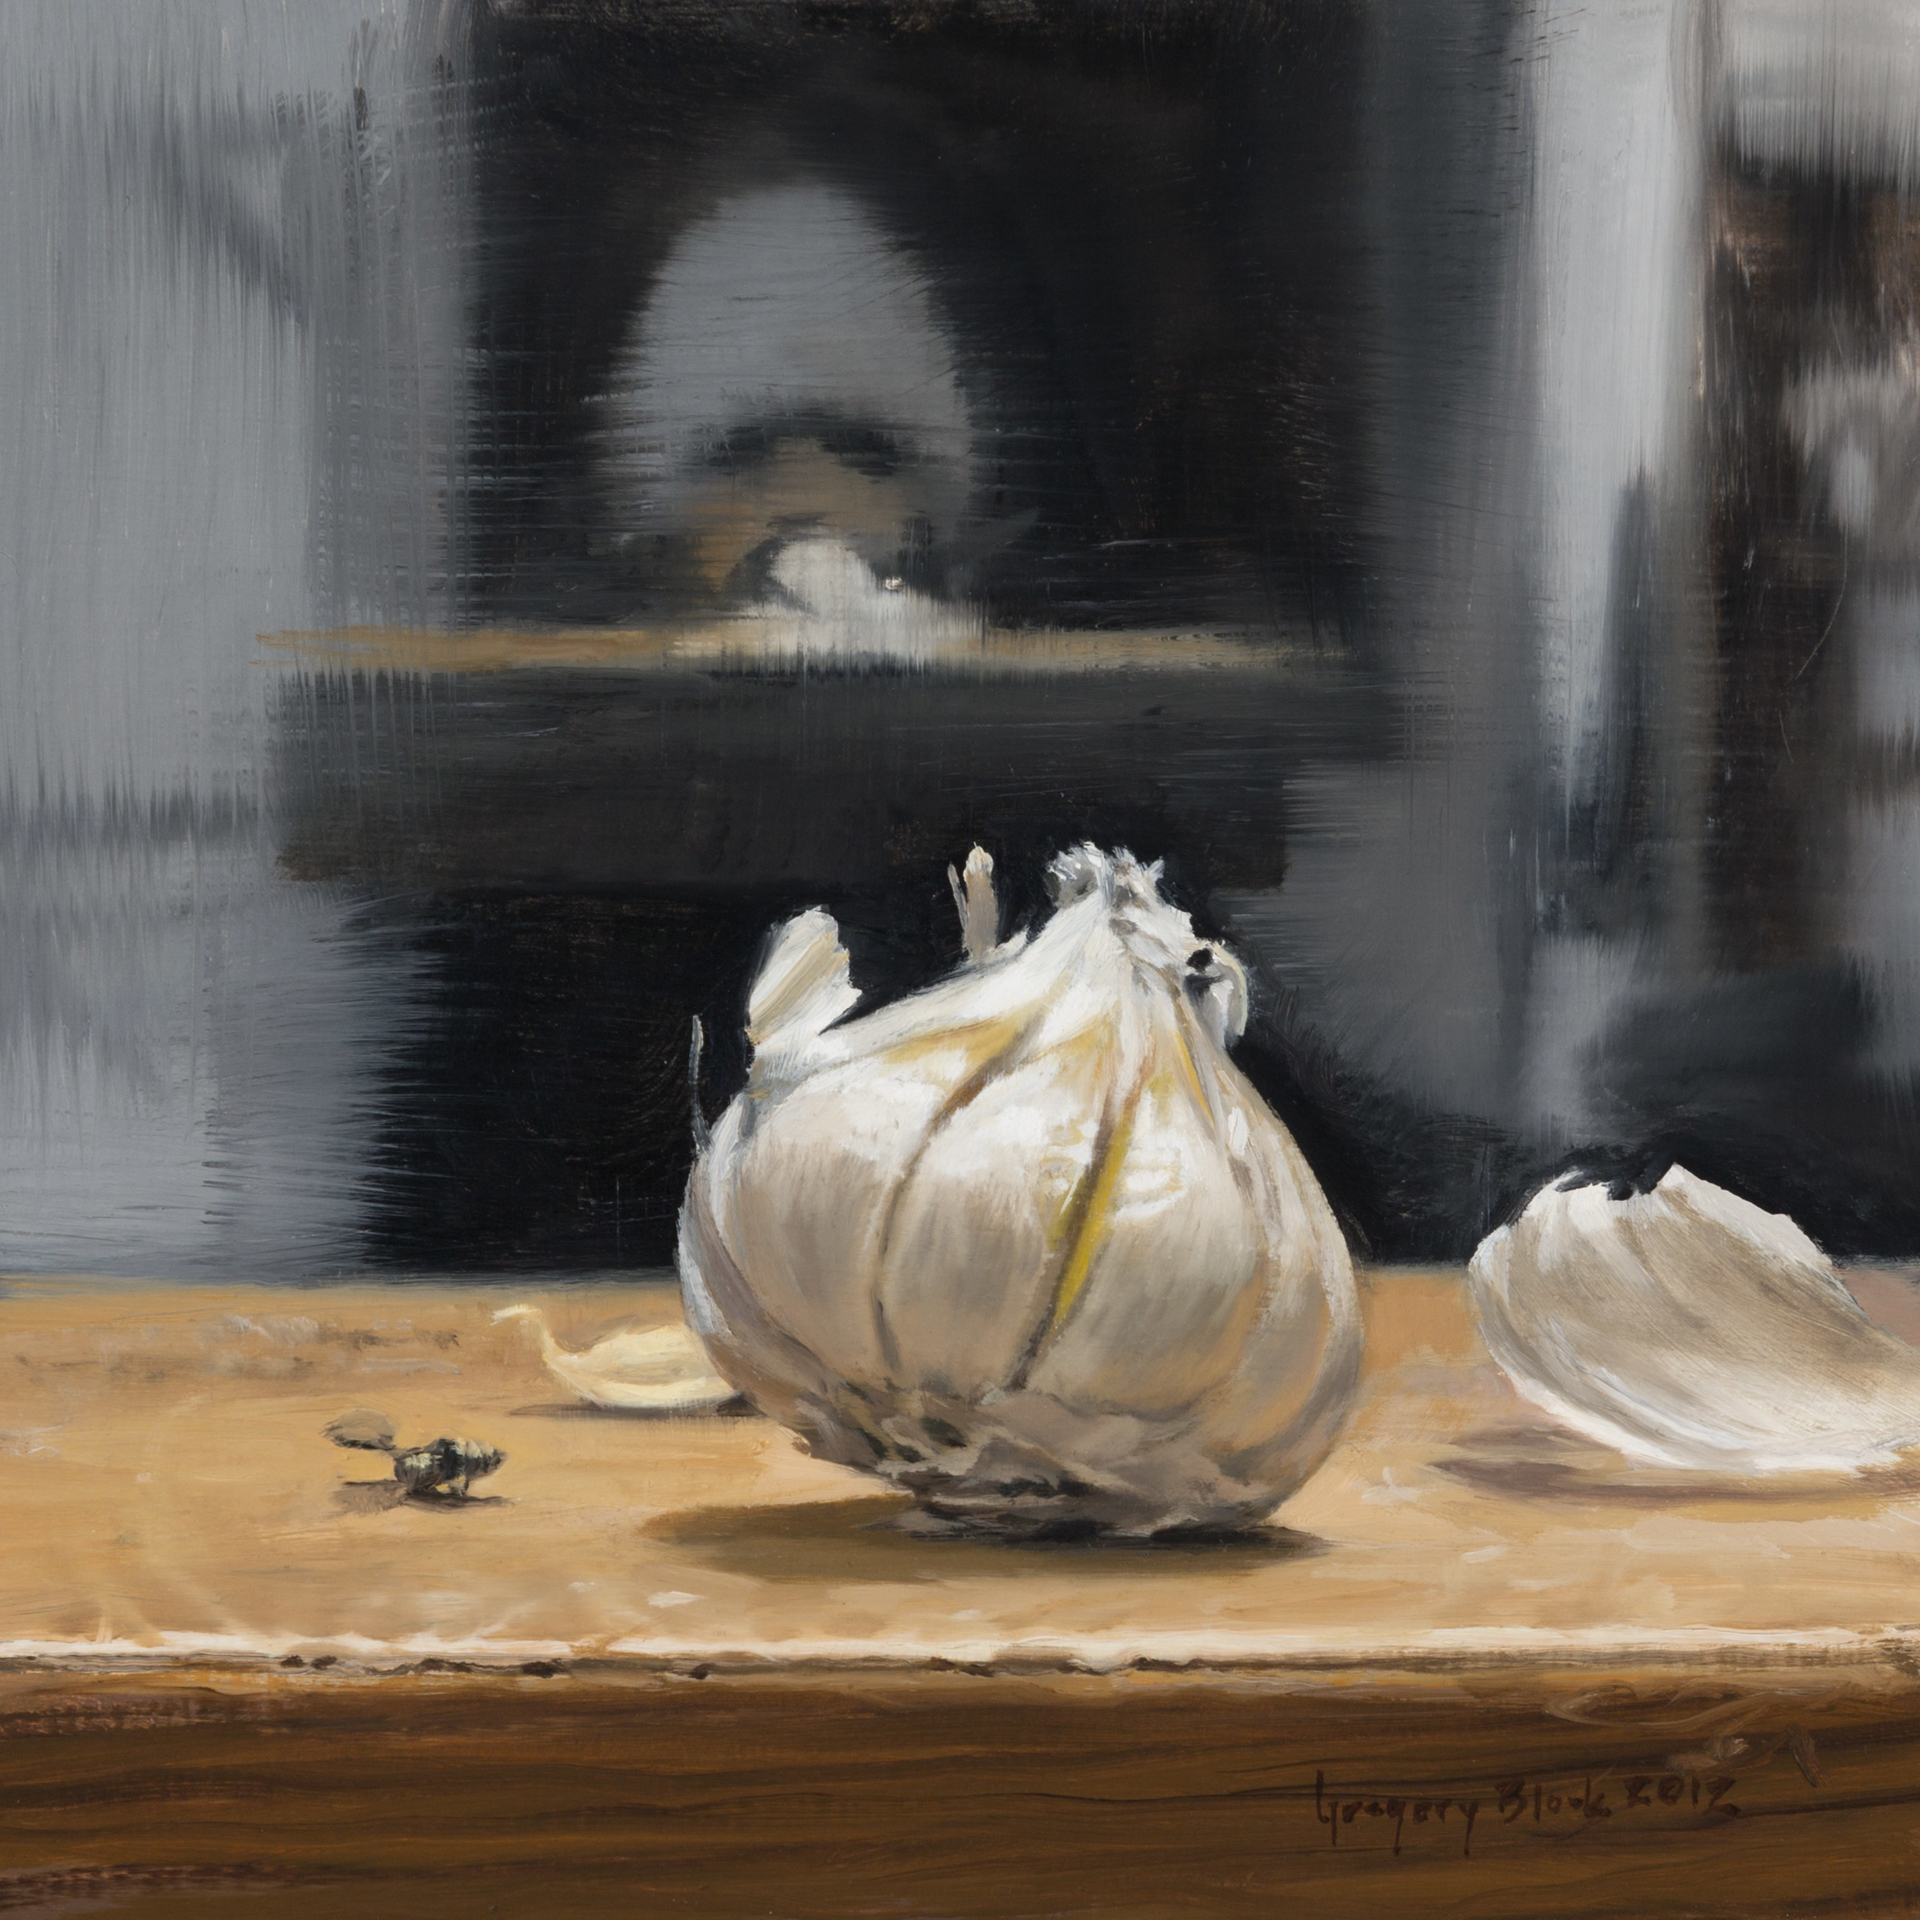 Garlic and Self Portrait in Gray Hat by Gregory Block